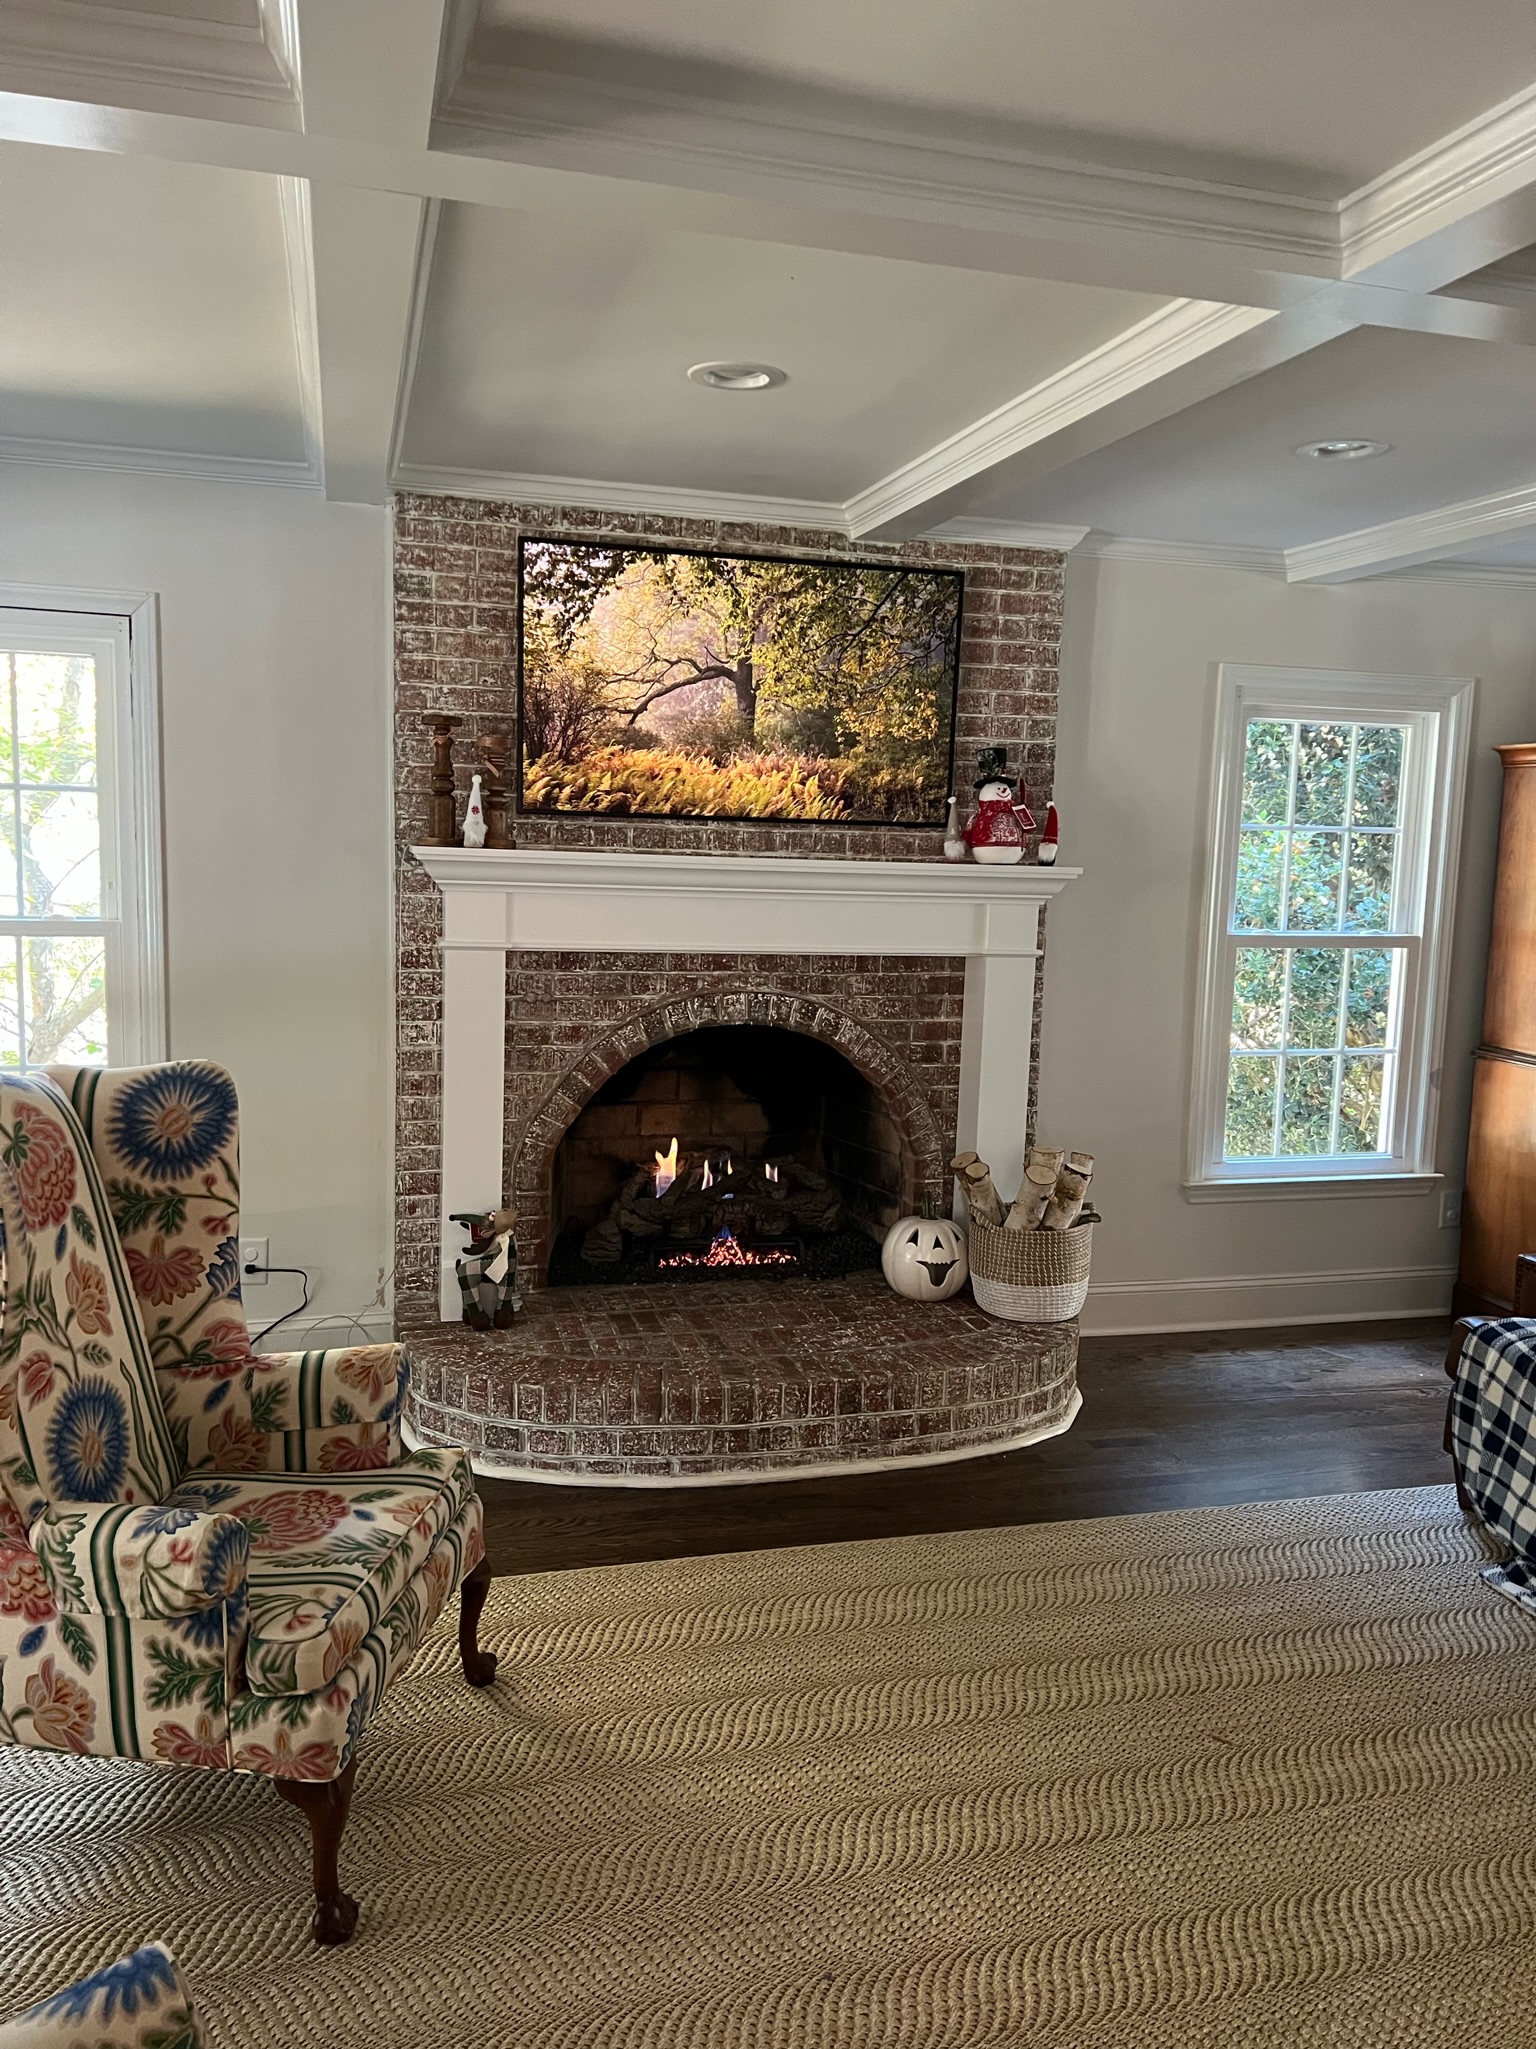 Built in Fireplace Mantel and Niche Cabinets